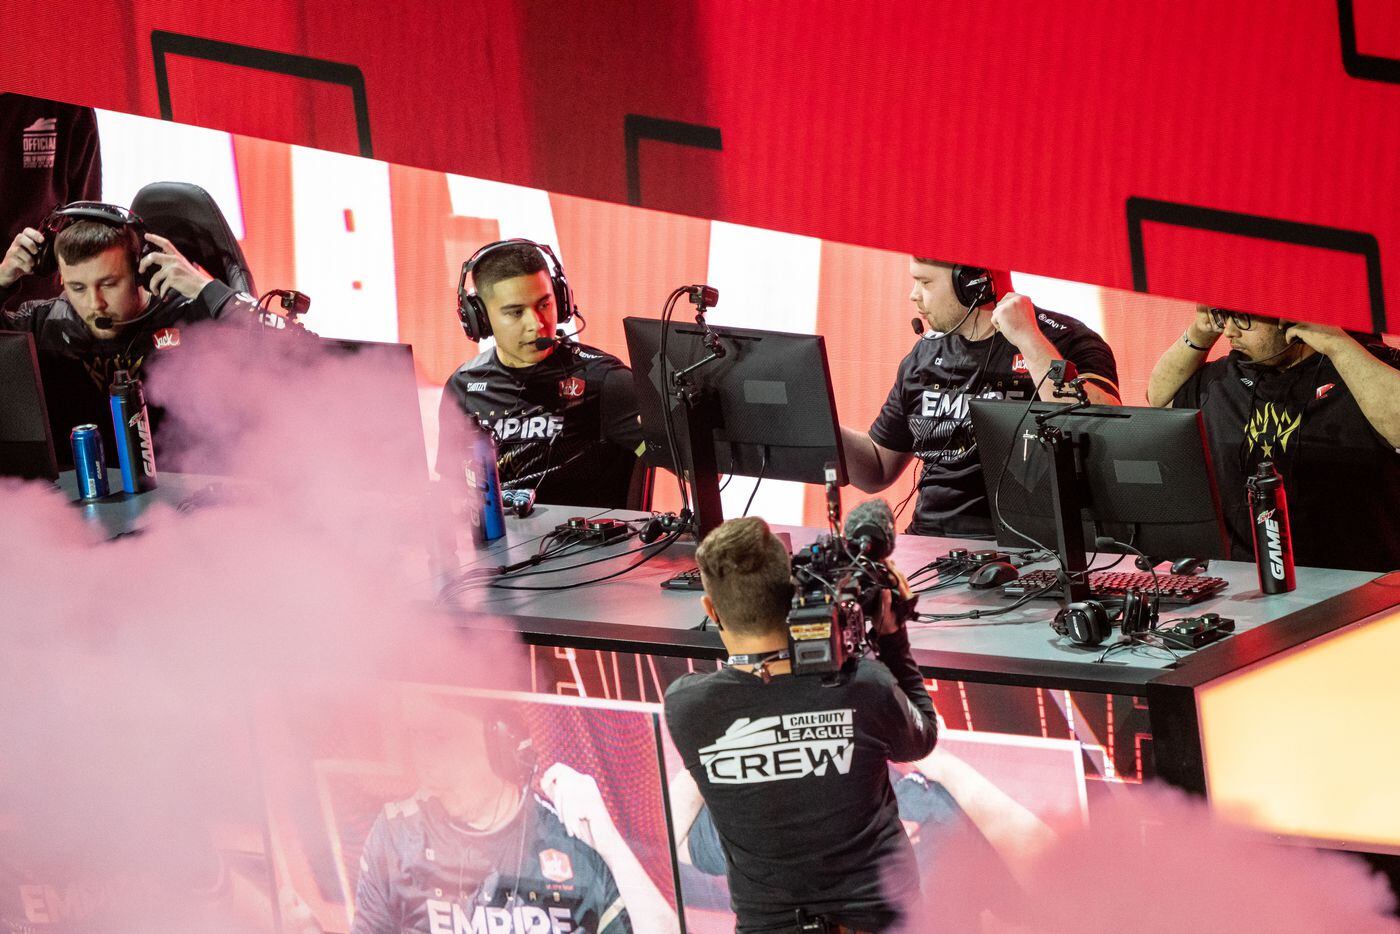 The Dallas Empire exchange fist bumps after losing to the Atlanta FaZe during the winners final of the Call of Duty league playoffs at the Galen Center on Saturday, August 21, 2021 in Los Angeles, California. The Empire lost to FaZe 0 - 3 in their first match of the day but are still in contention to play in the finals through the elimination finals. (Justin L. Stewart/Special Contributor)